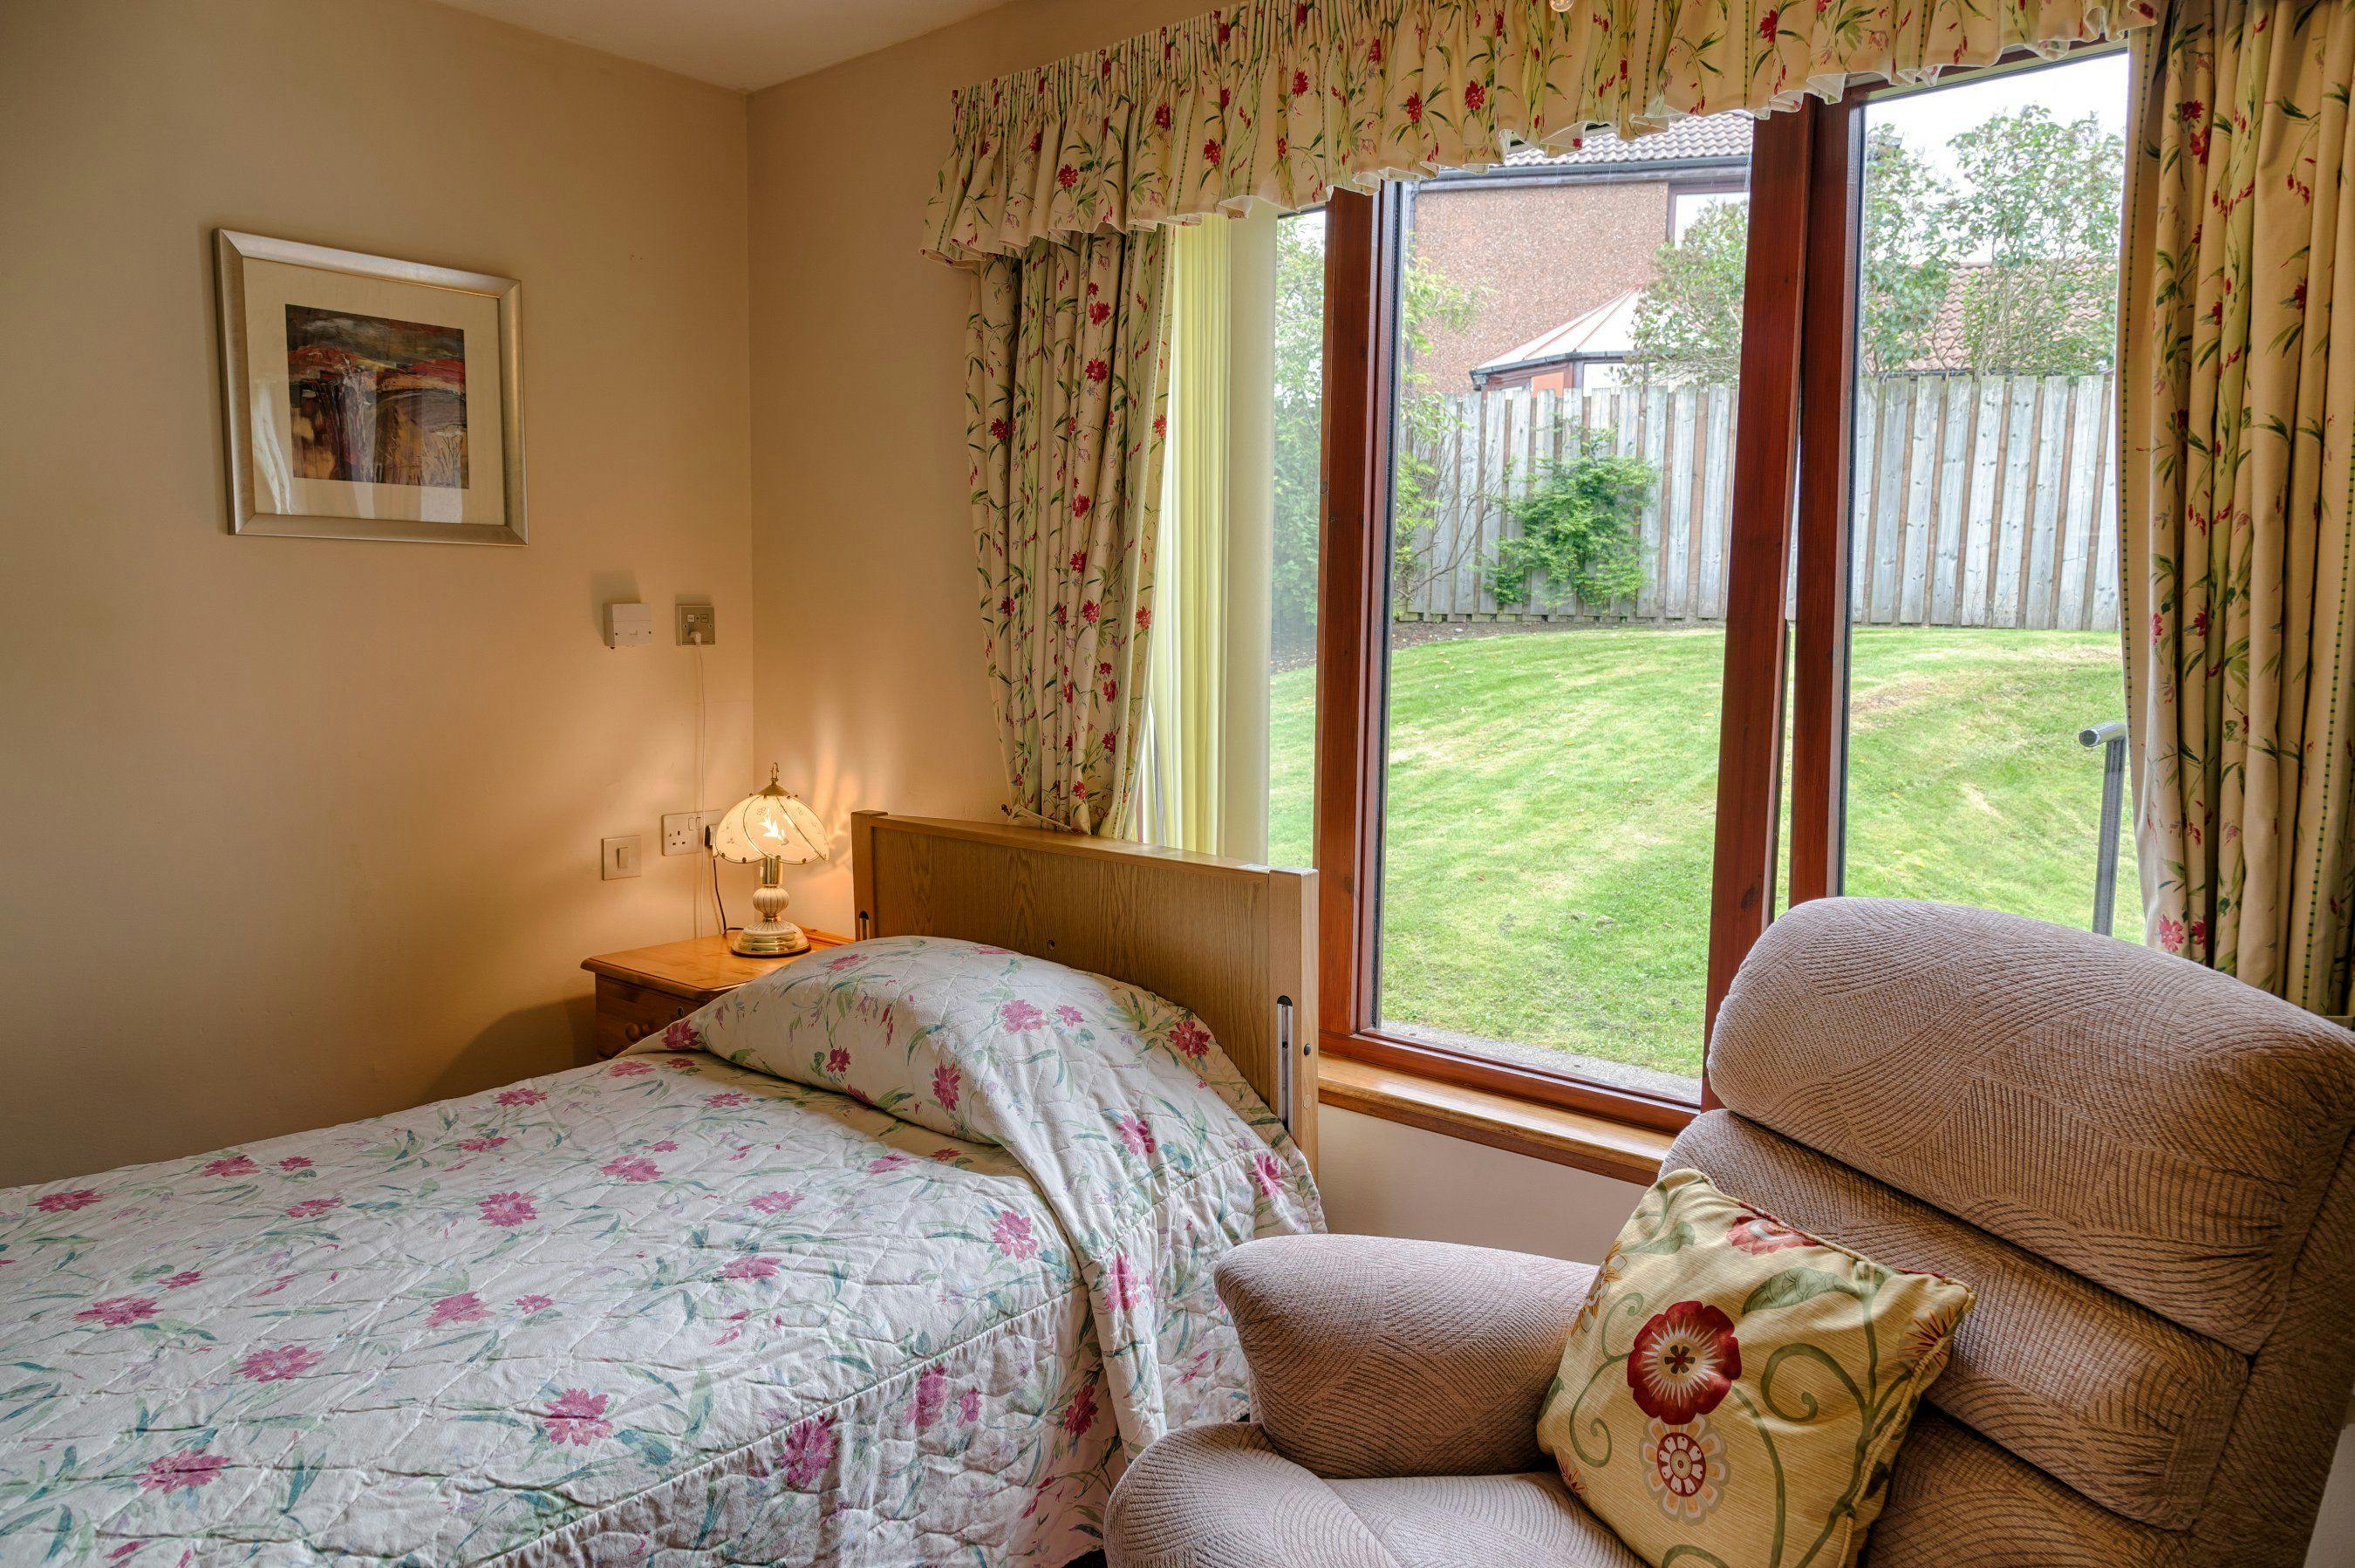 Bedroom at Lethen Park Care Home in Aberdeen, Scotland